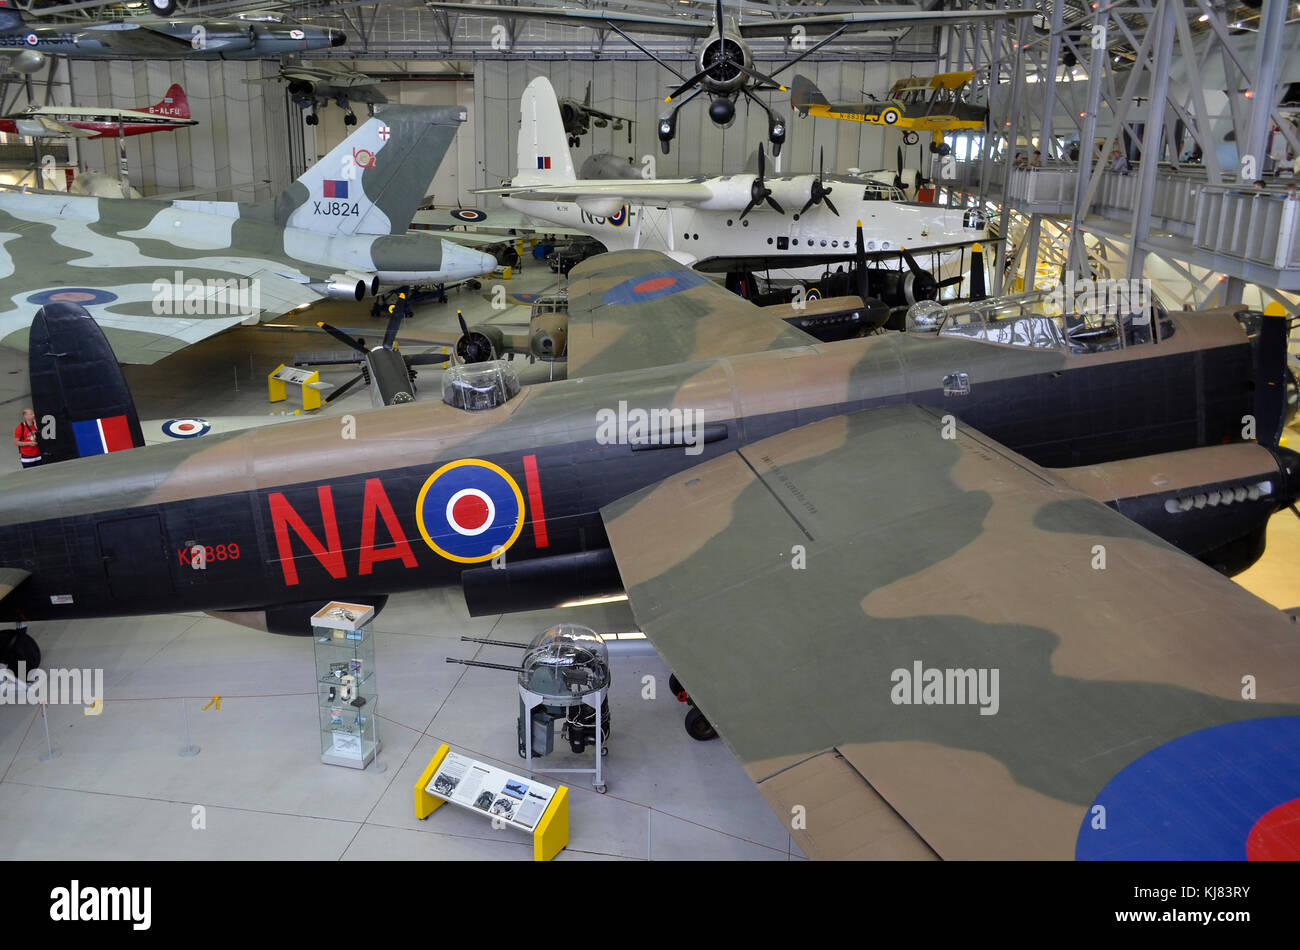 Duxford Airspace aircraft museum, Duxford, UK. Avro Lancaster in foreground. Stock Photo